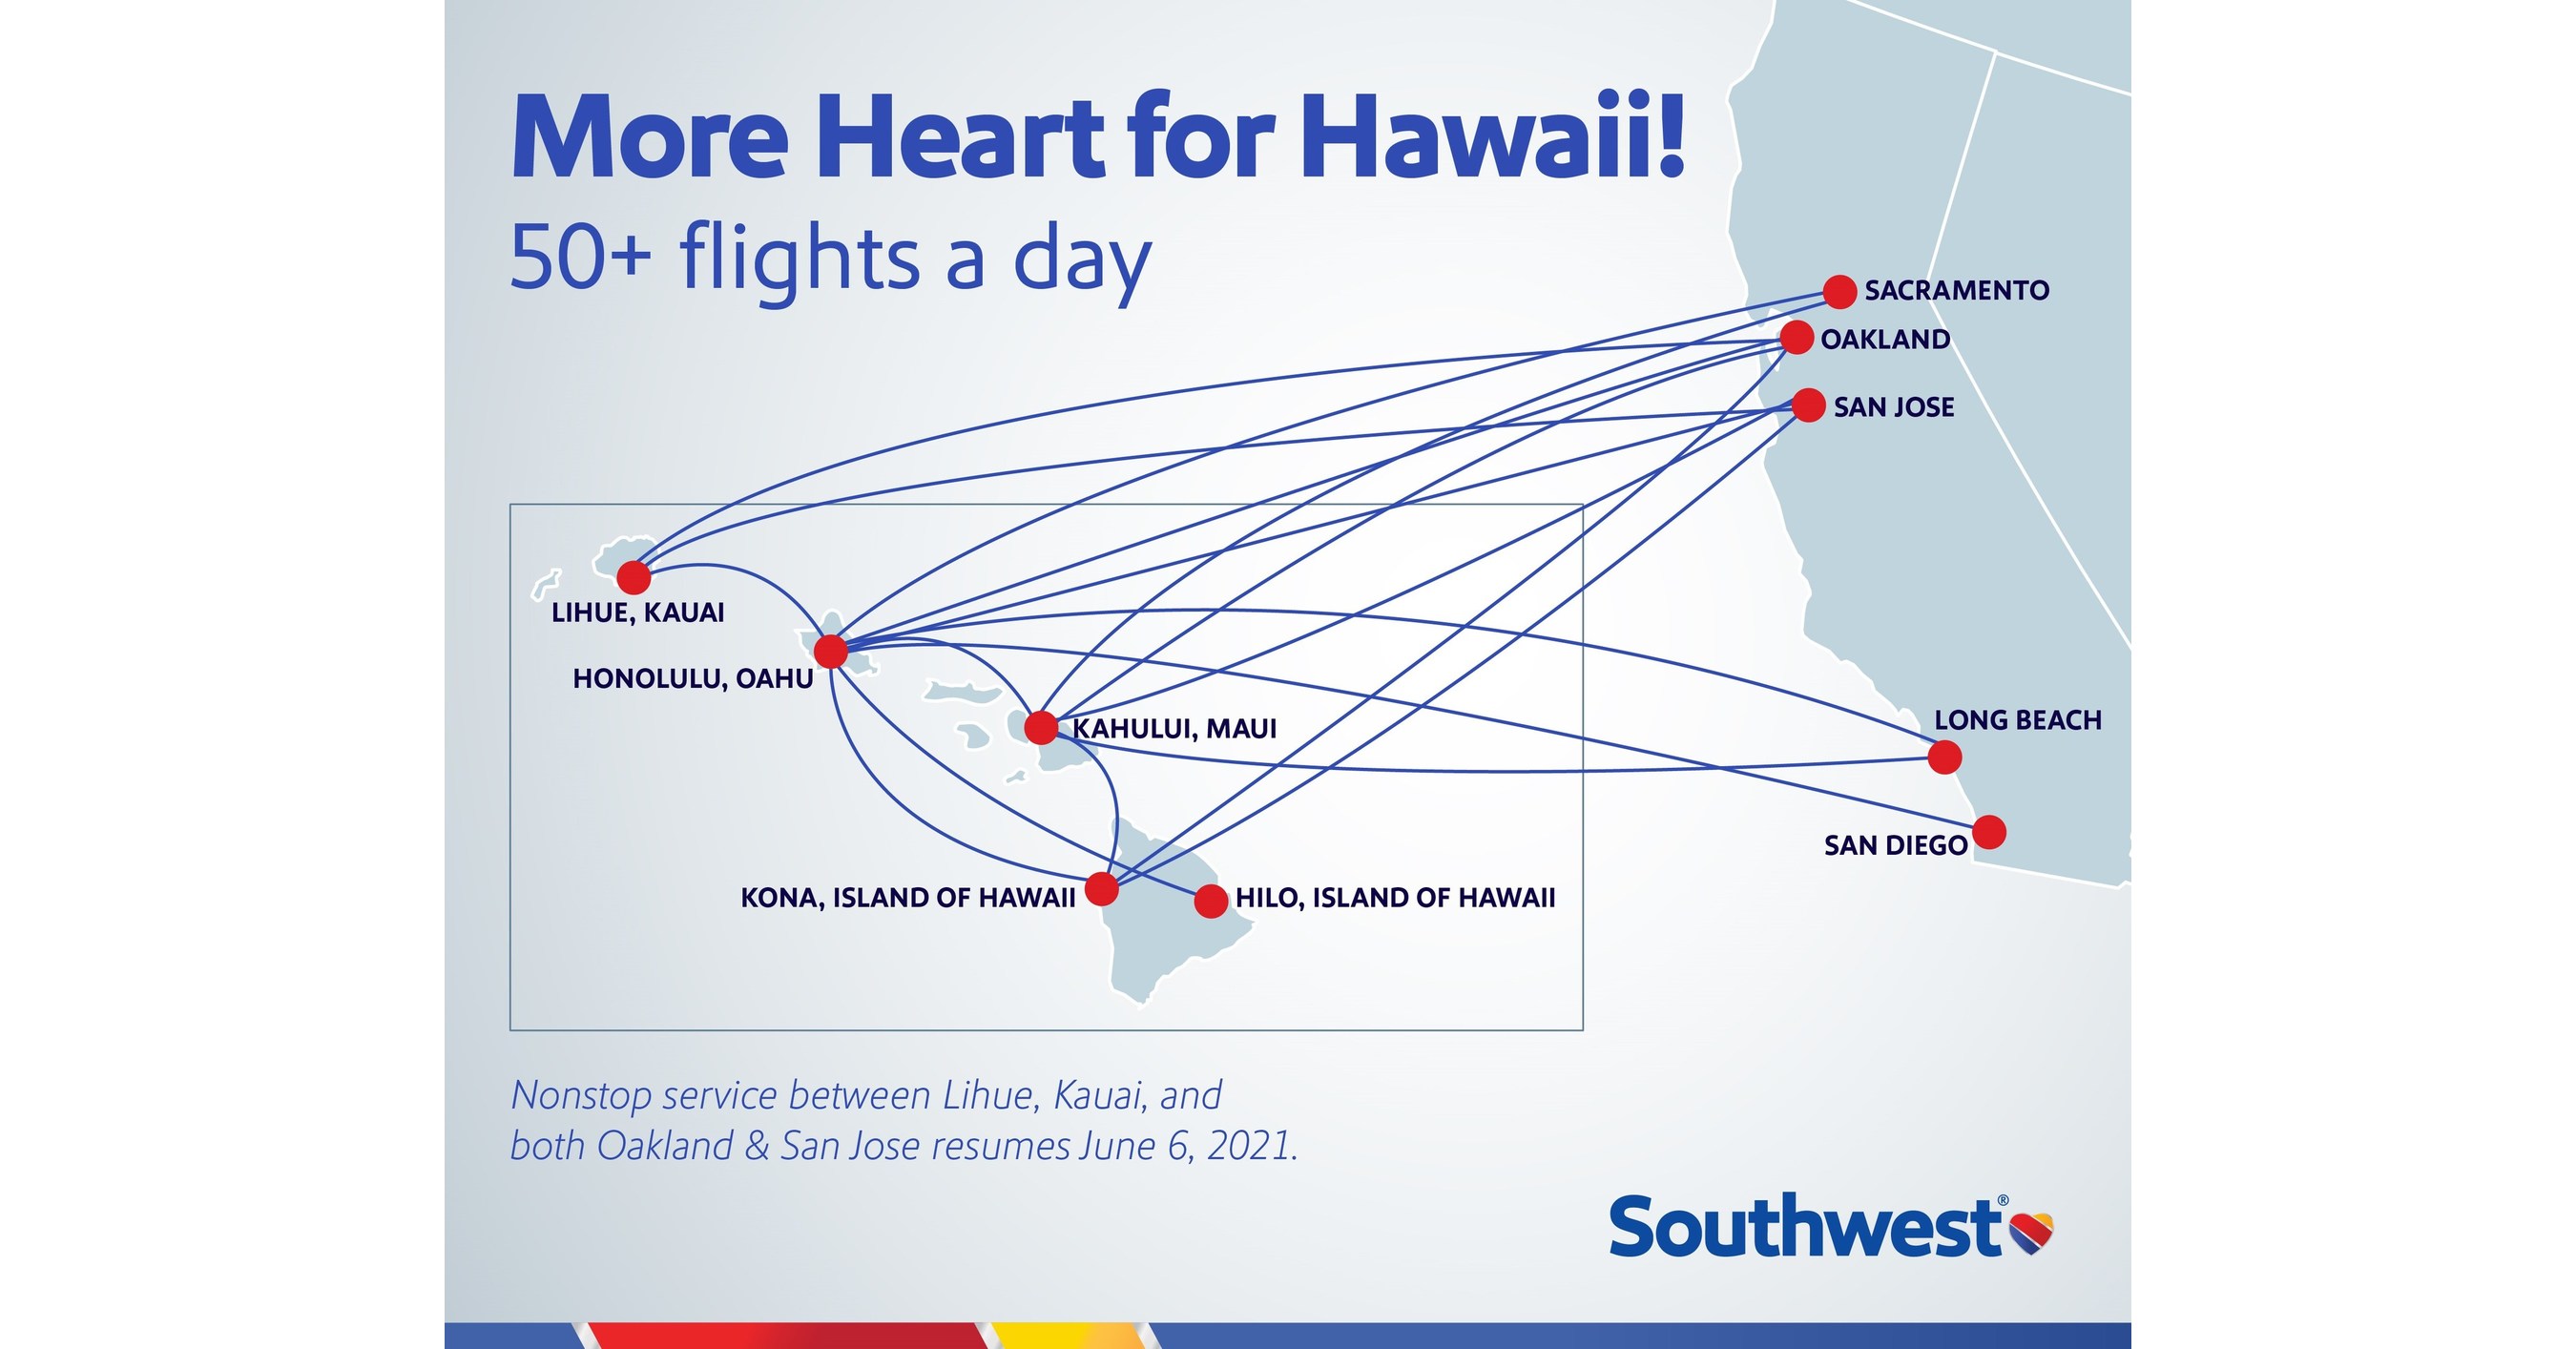 Southwest Hawaii Flight Map Southwest Airlines Now Offering Pre-Cleared Arrival Into Hawaii